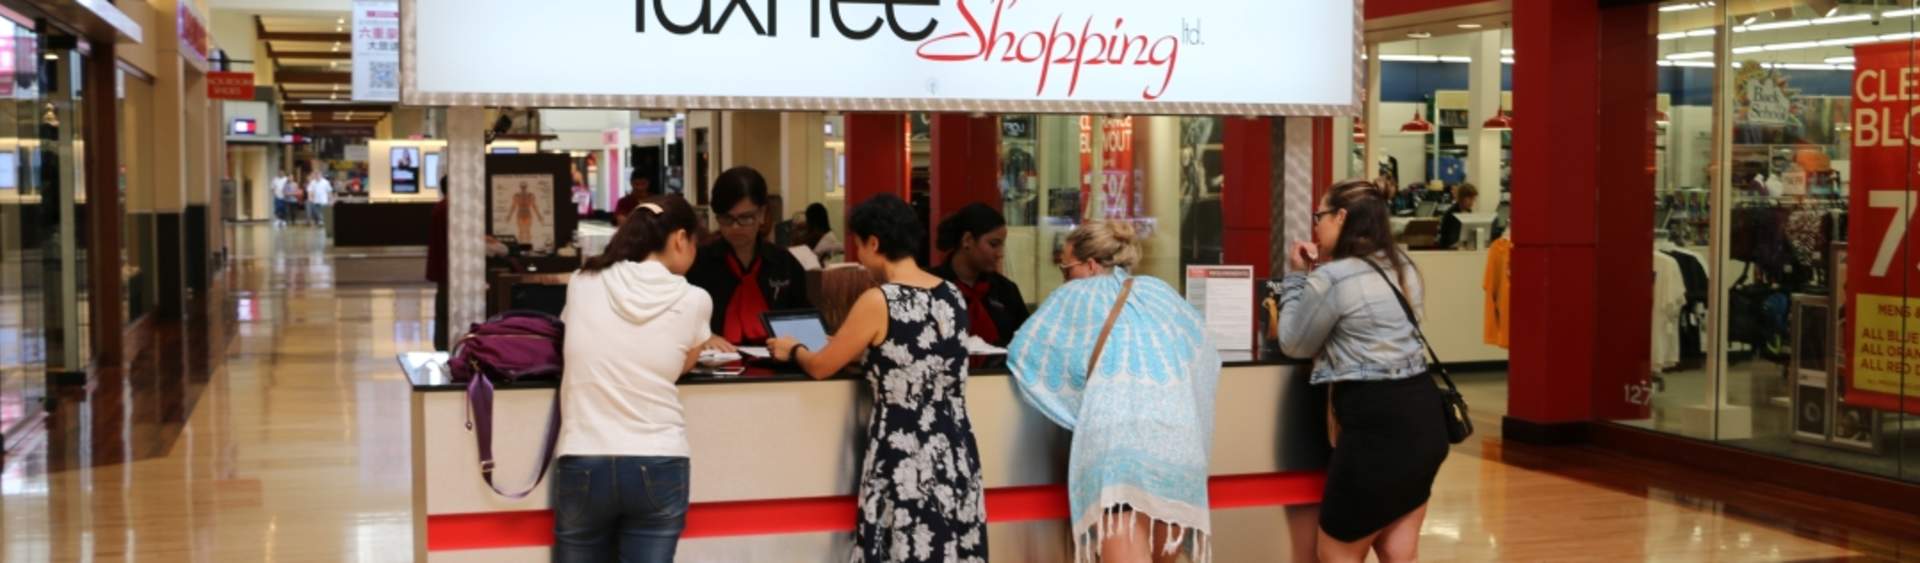 Find Big Deals During Tax Free Shopping at Grapevine Mills